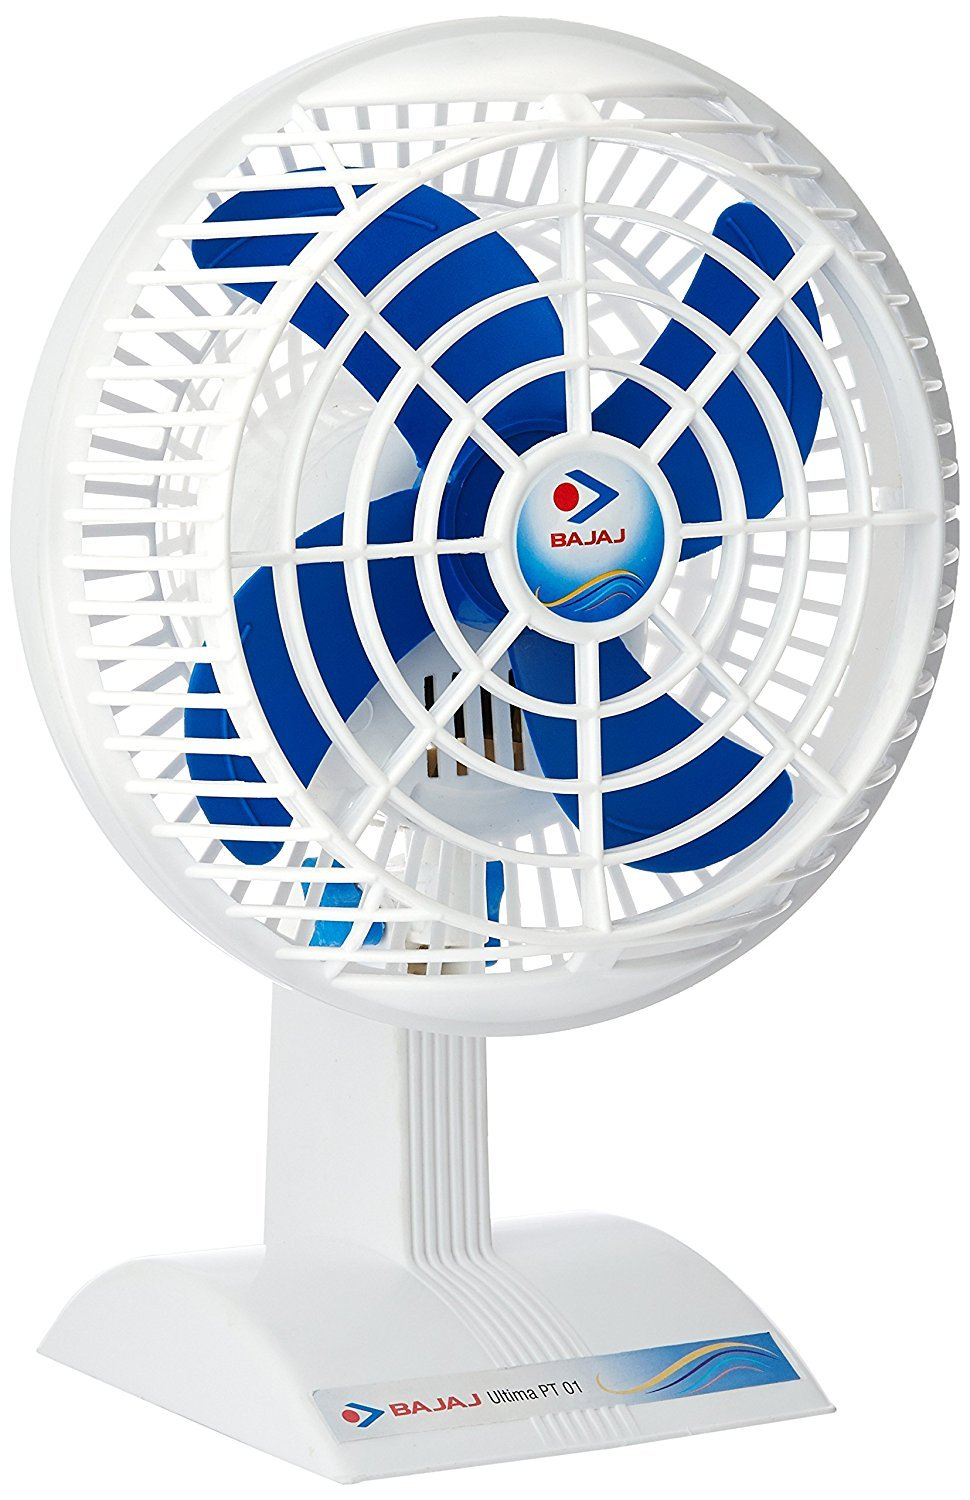 Best Selling High Speed Table Fans Under Inr 1000 In India pertaining to proportions 970 X 1500